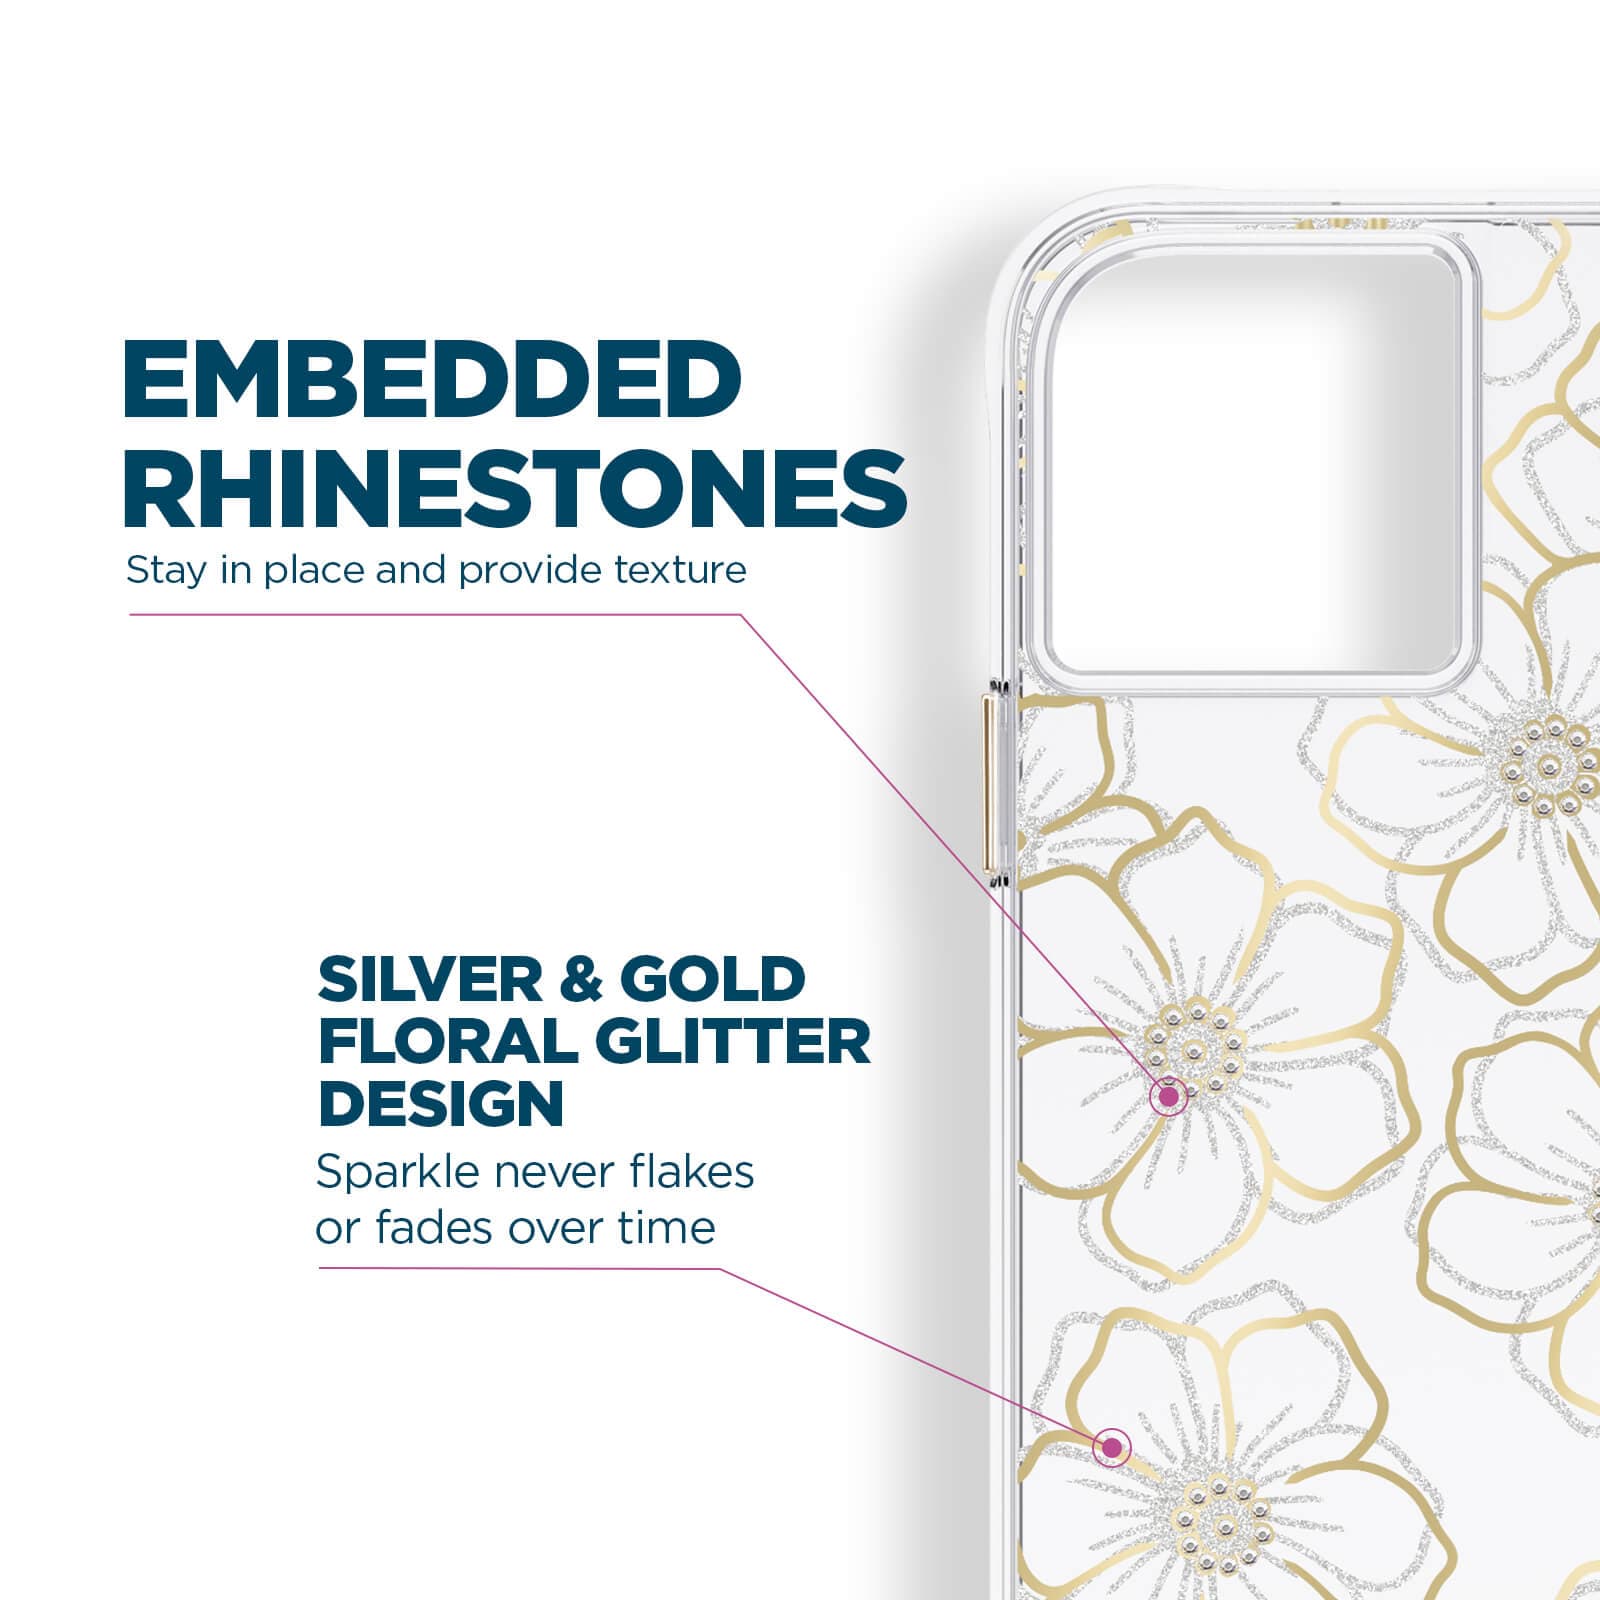 Embedded rhinestones stay in place and provide texture. Silver & gold floral glitter design. sparkle never flakes or fades over time. color::Floral Gems